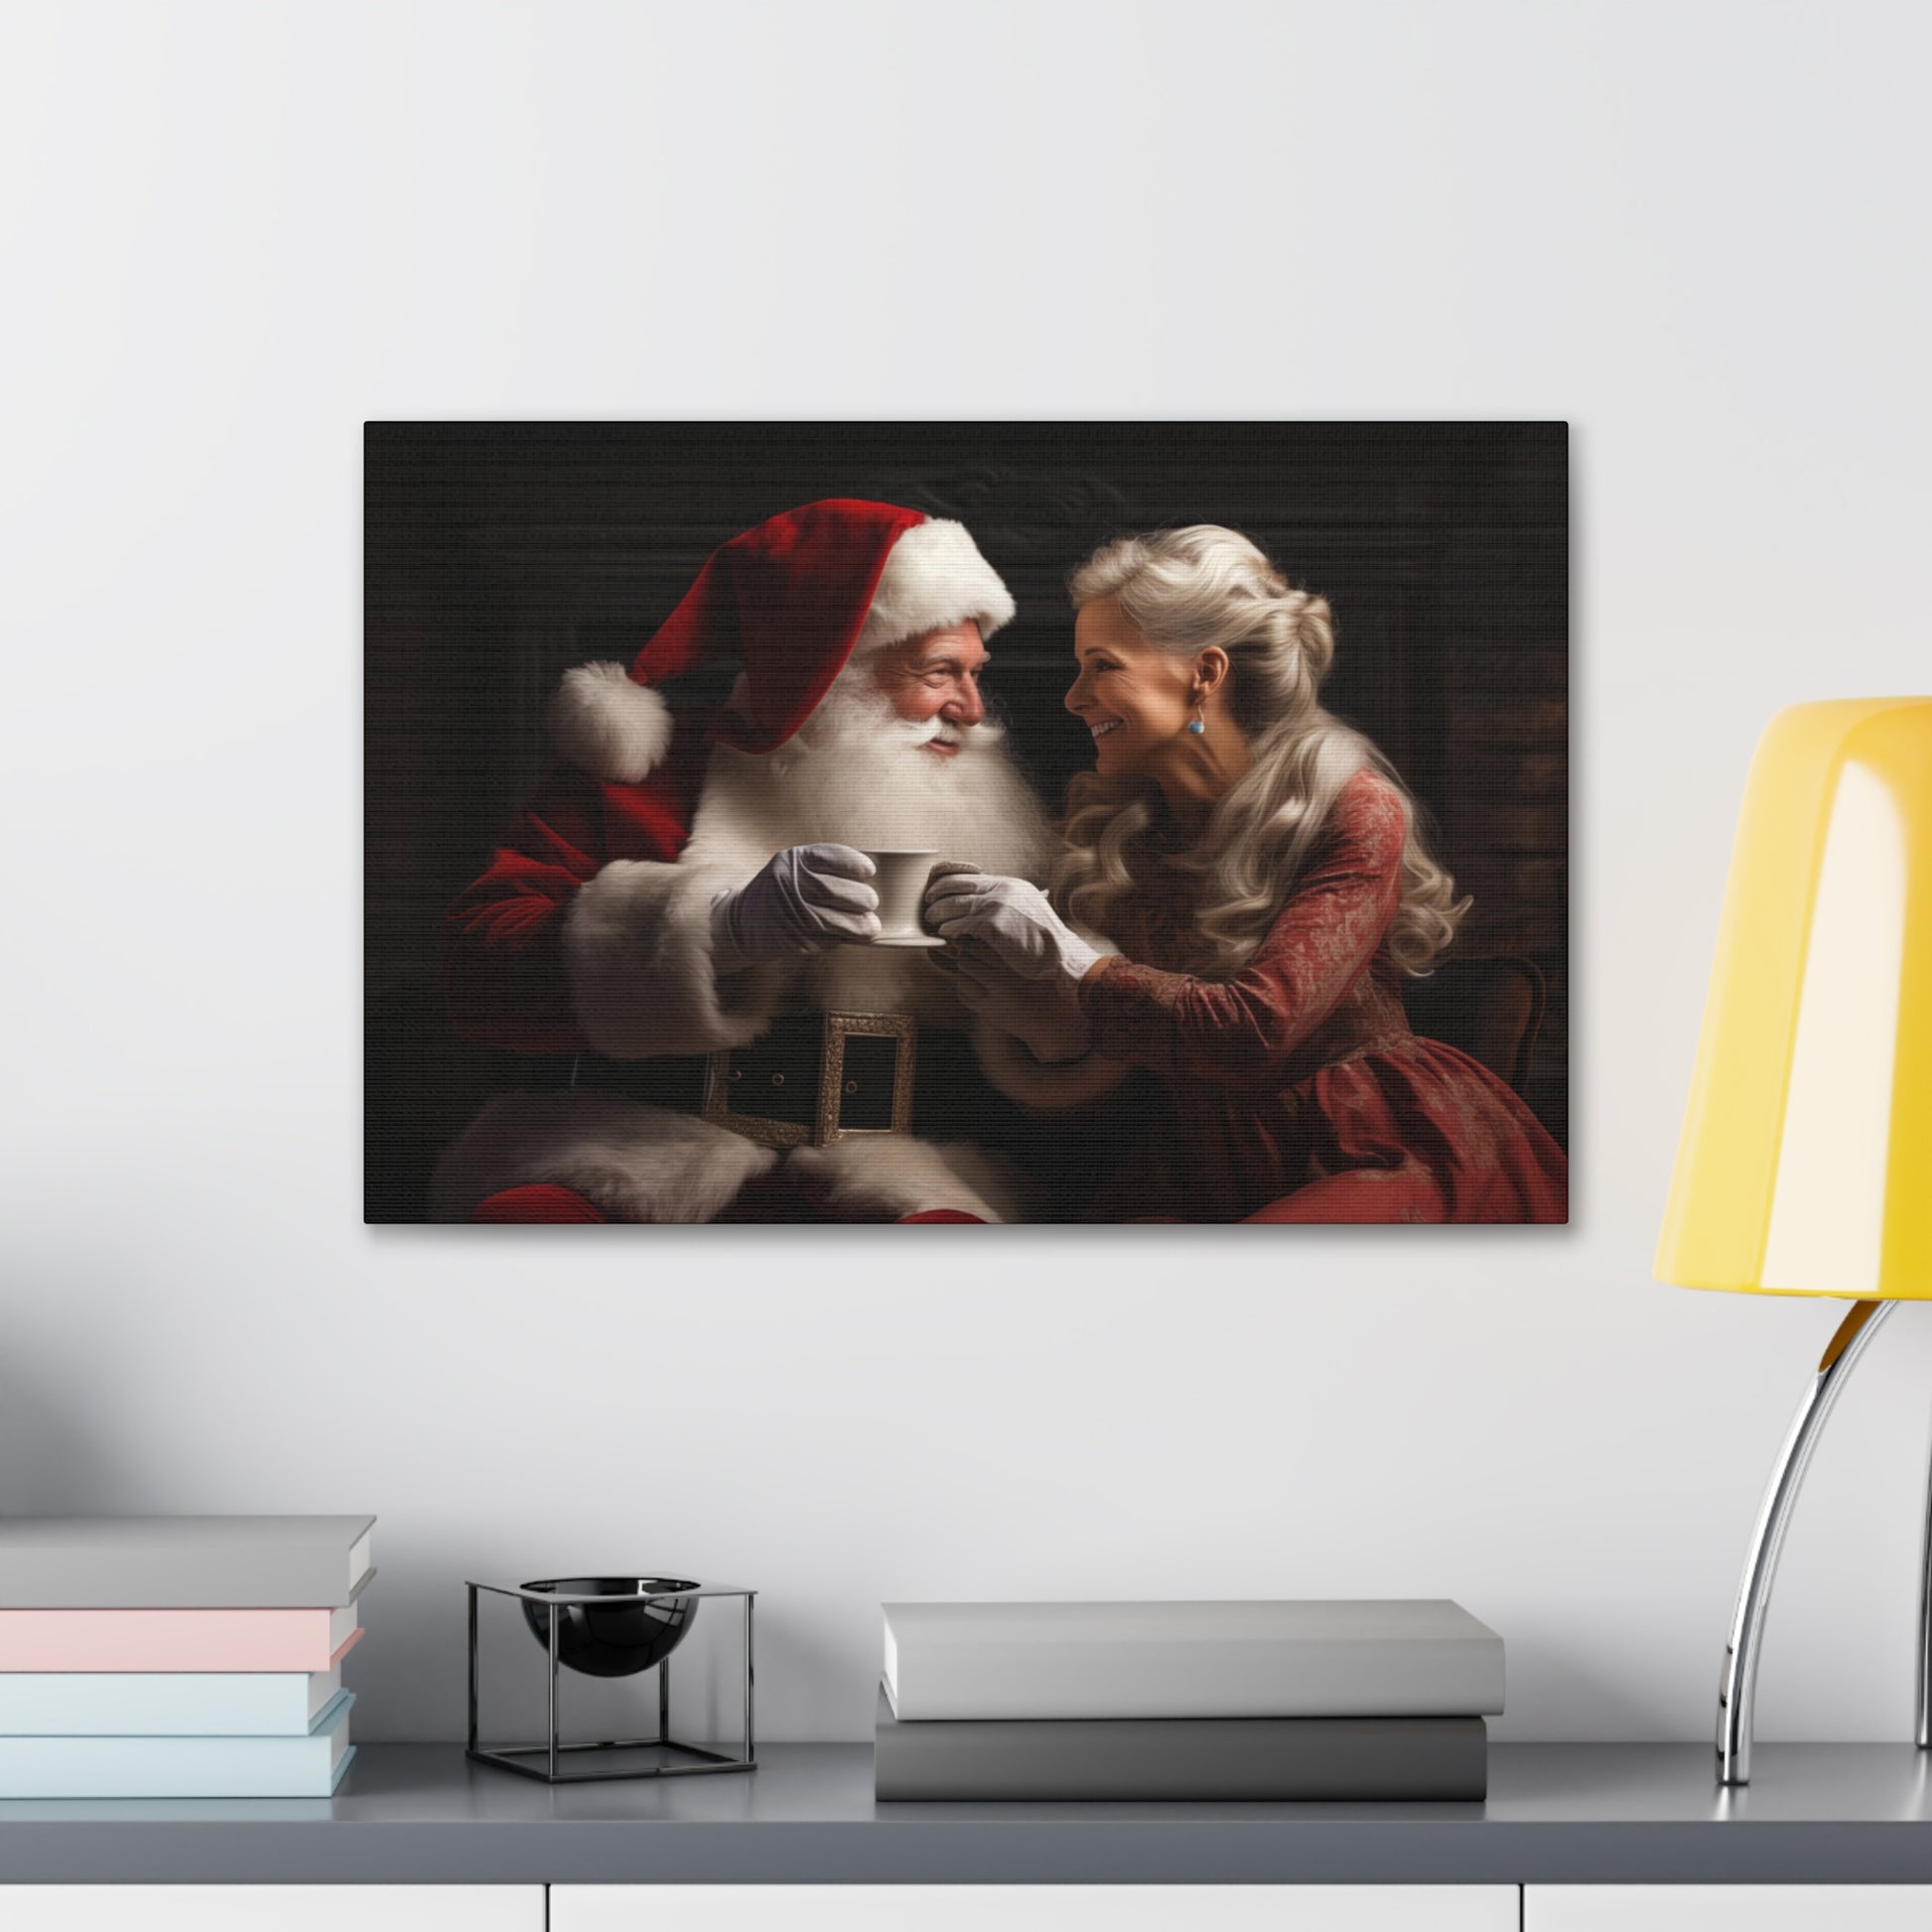 Mr. and Mrs. Claus Christmas wall decorations